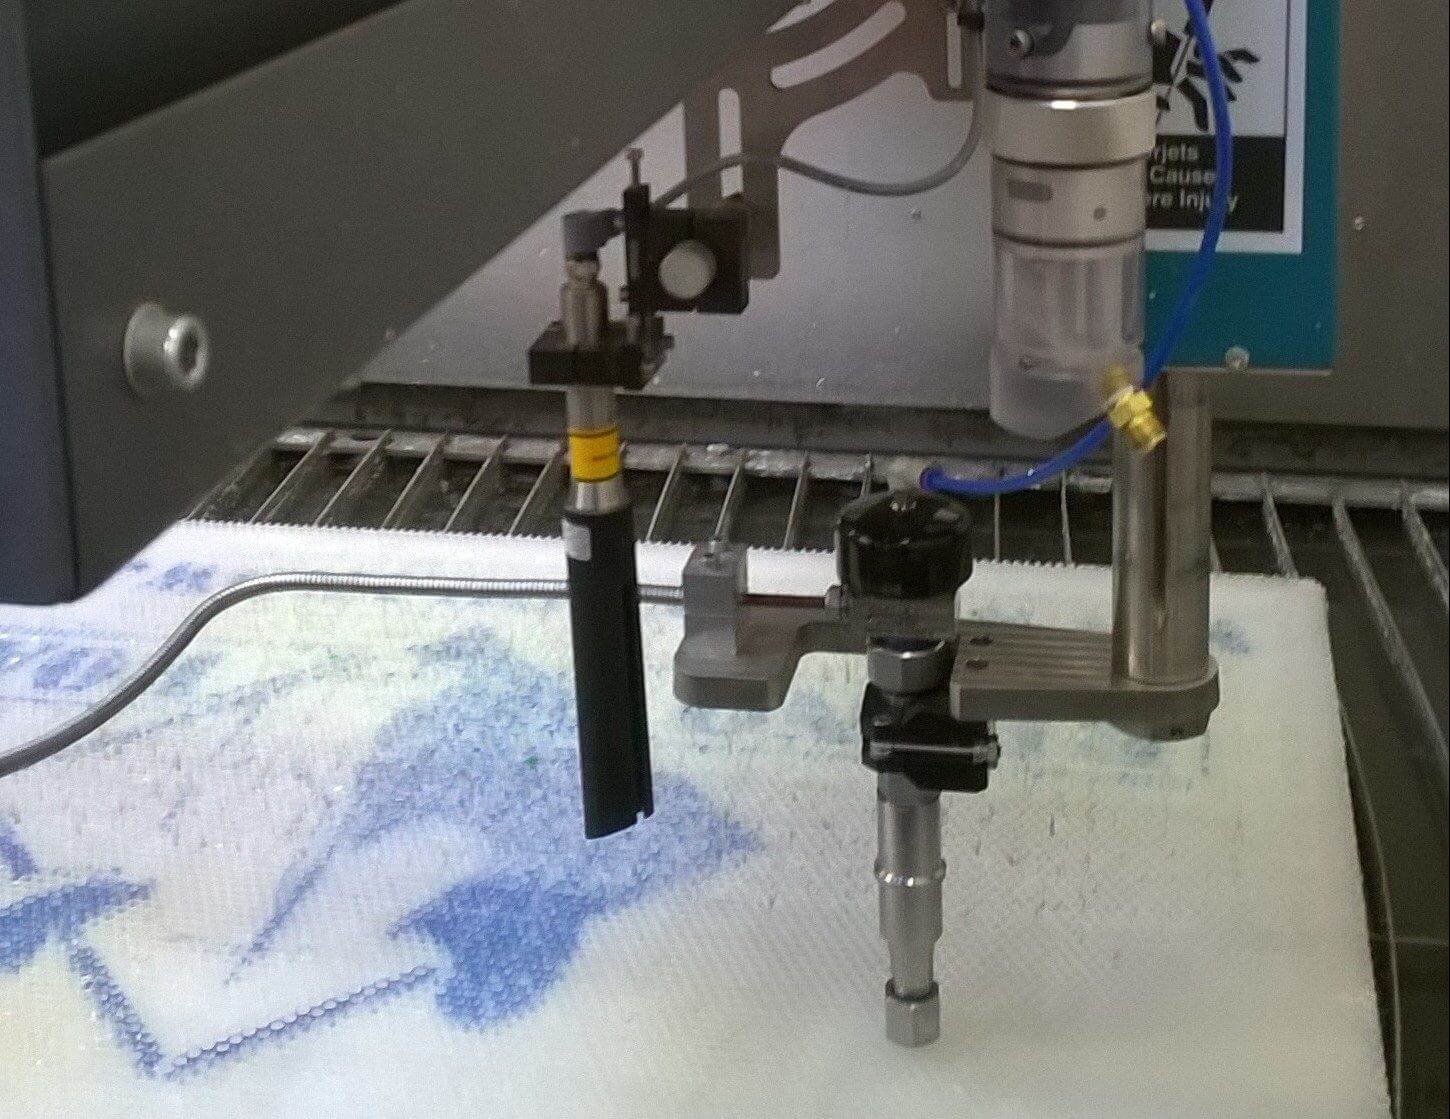 Who needs industrial water jet cutting?